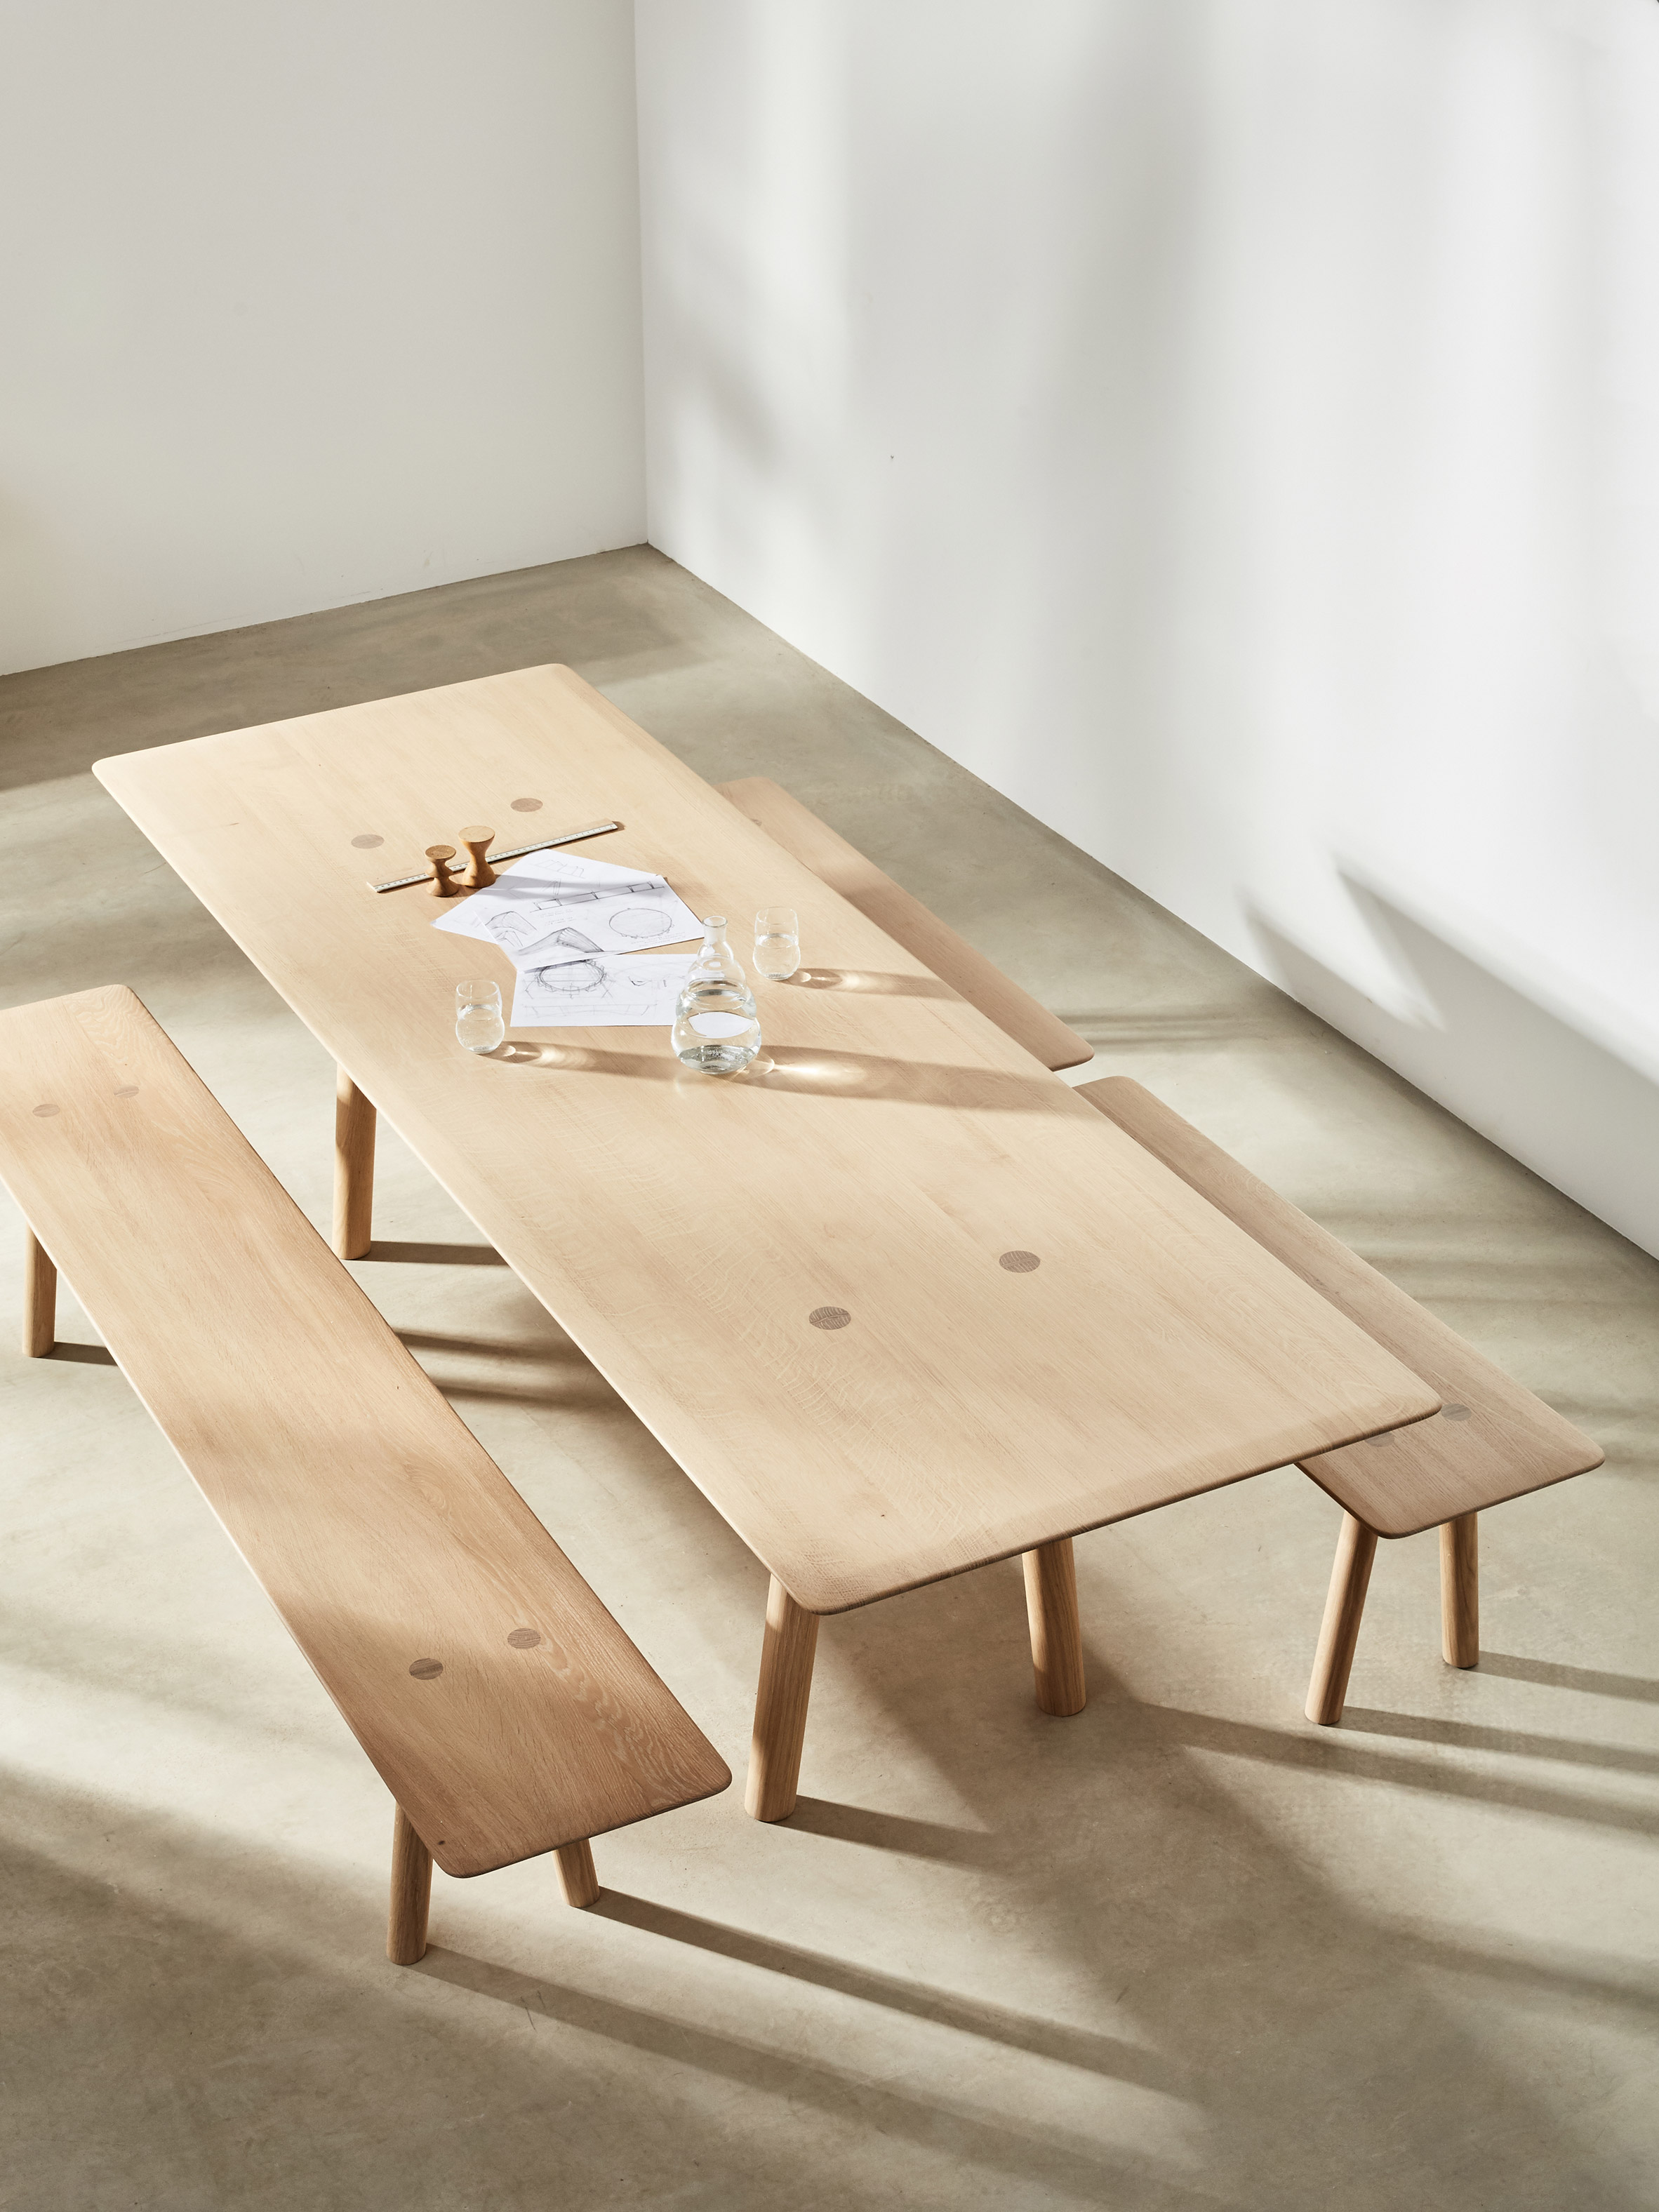 Wood Edge Table Top - Benchmark Contract Furniture